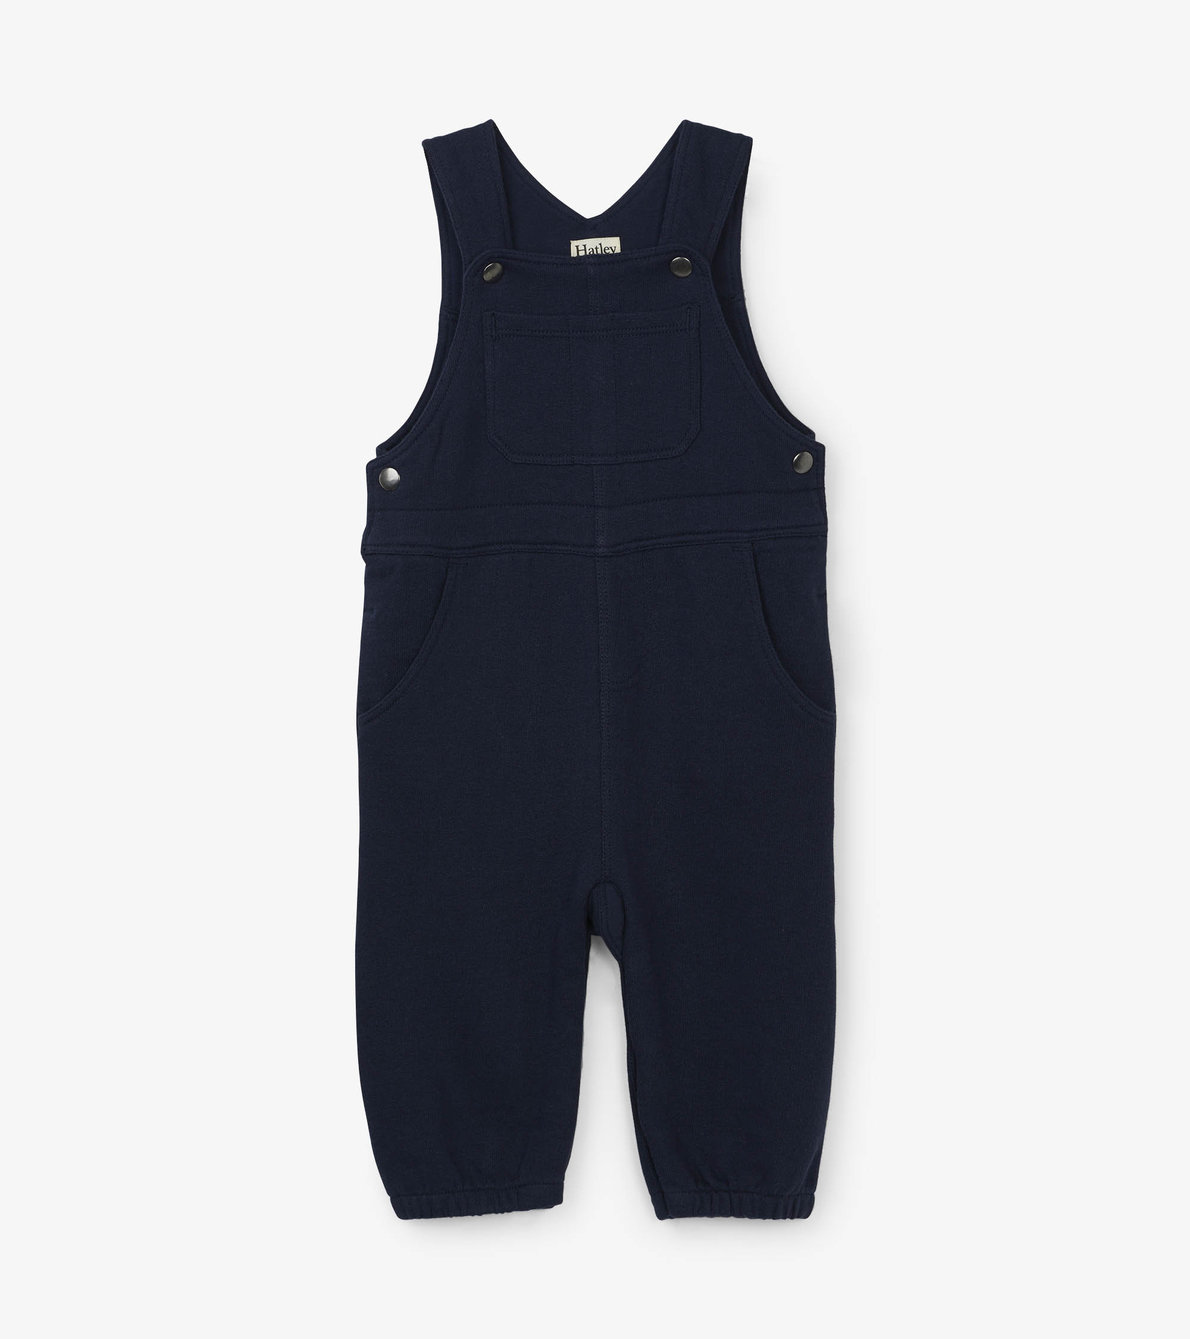 View larger image of Navy Knit Baby Overalls